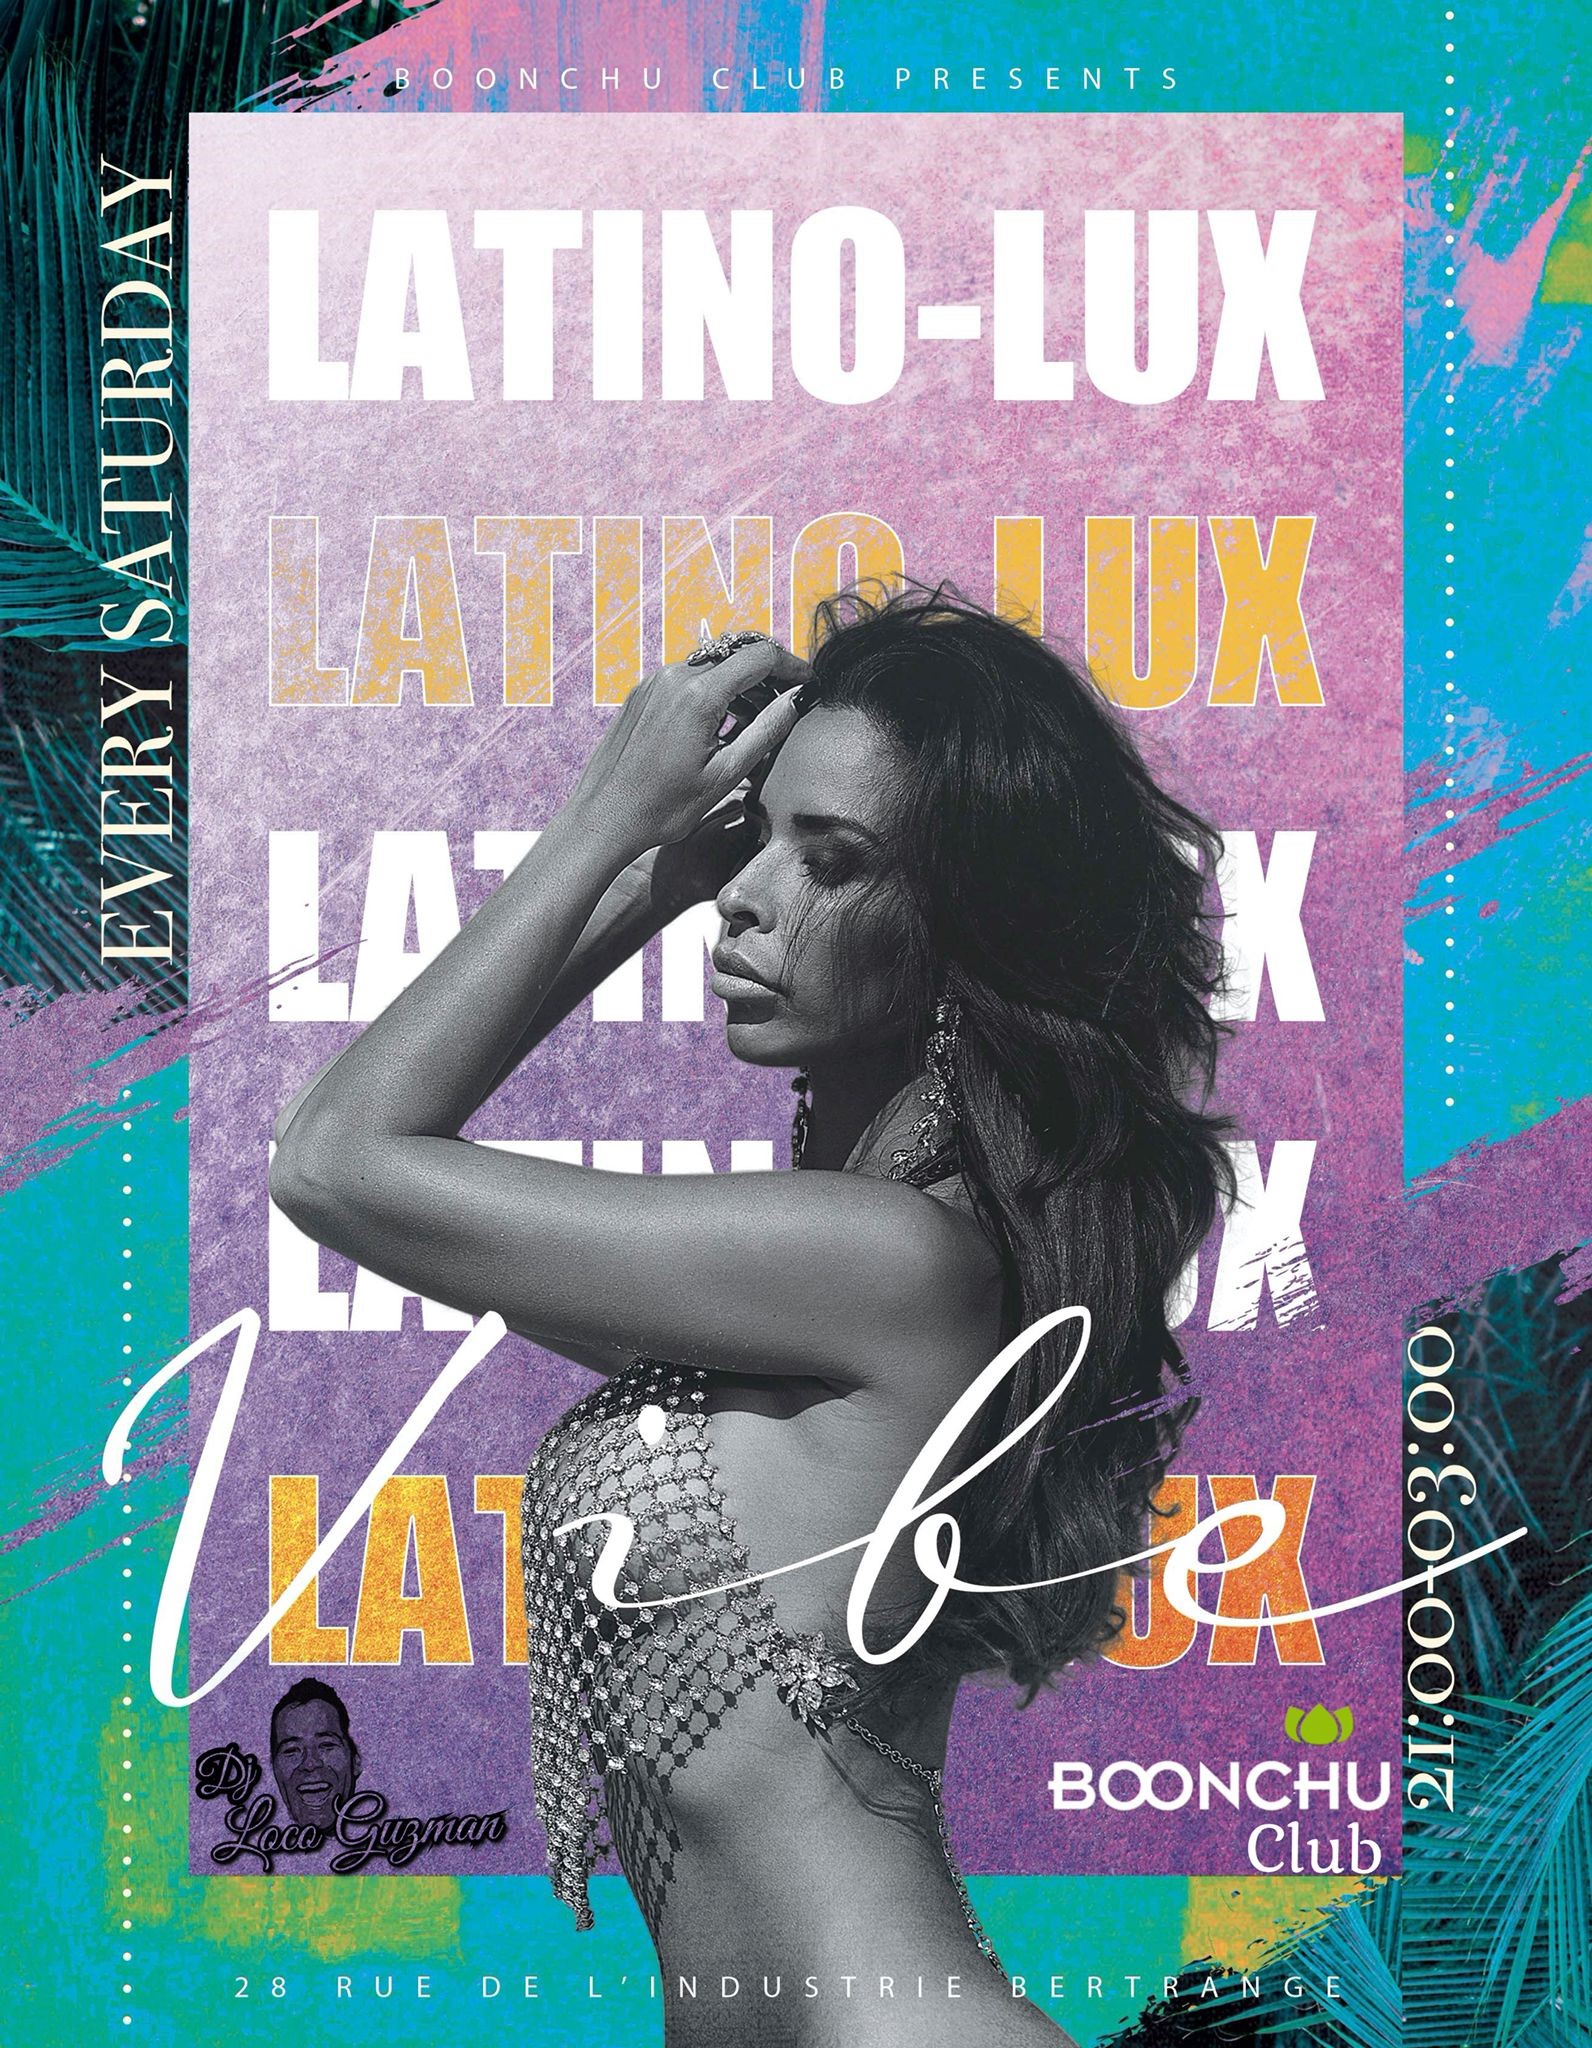 Latino Lux party